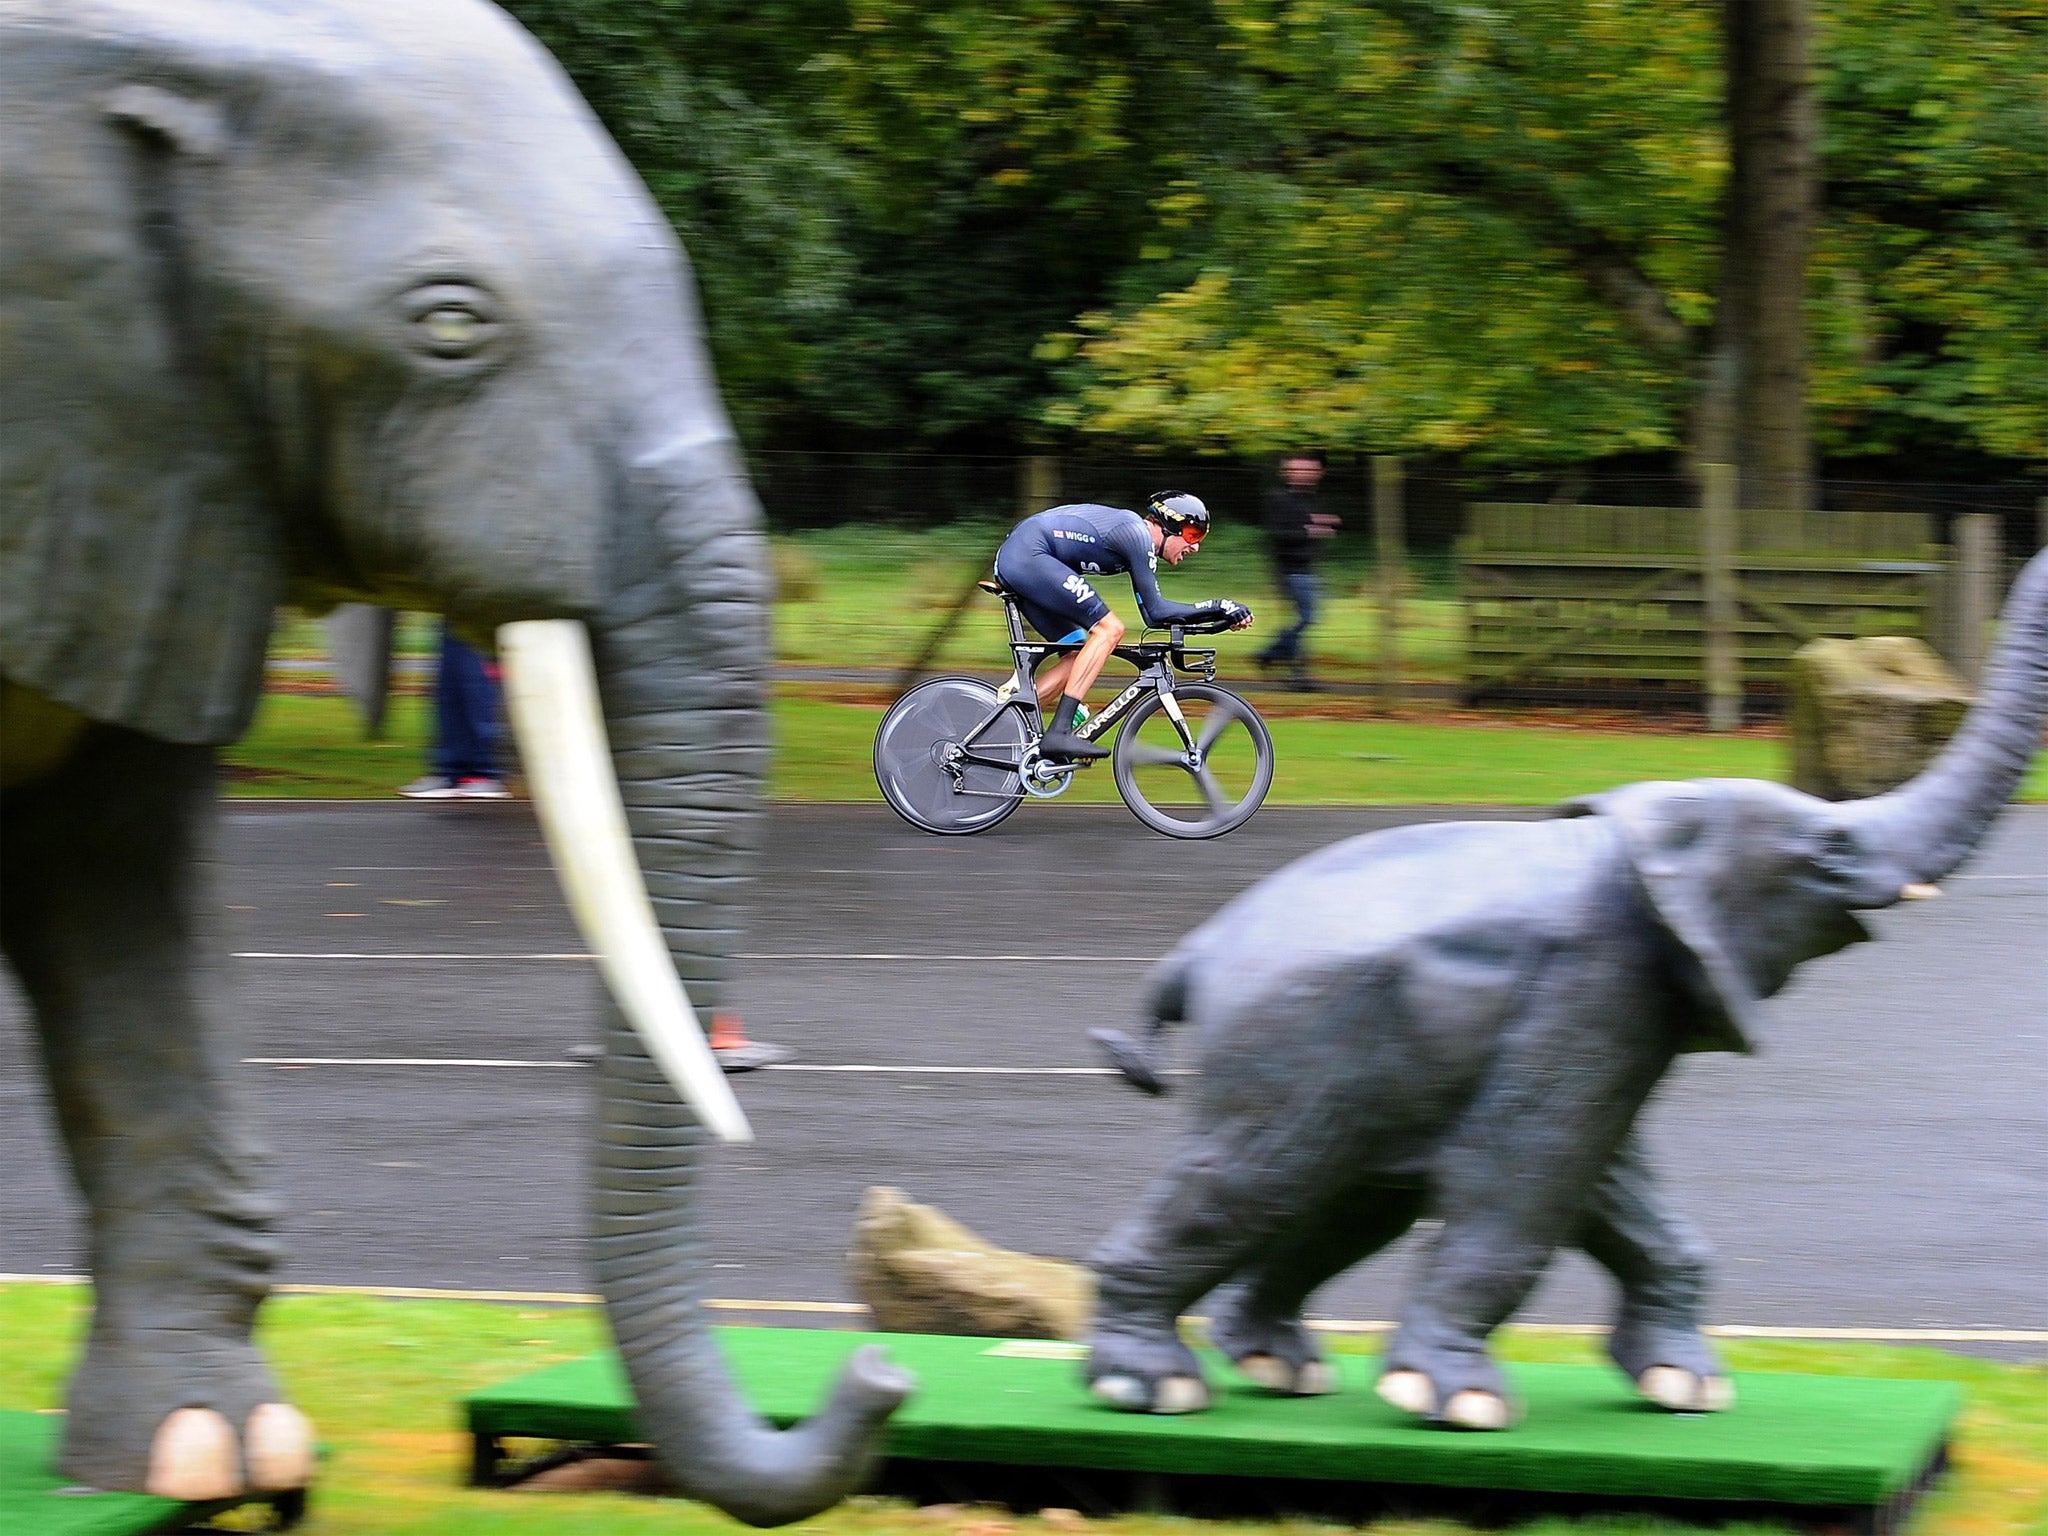 Bradley Wiggins enters Knowsley Safari Park on his way to winning the time trial